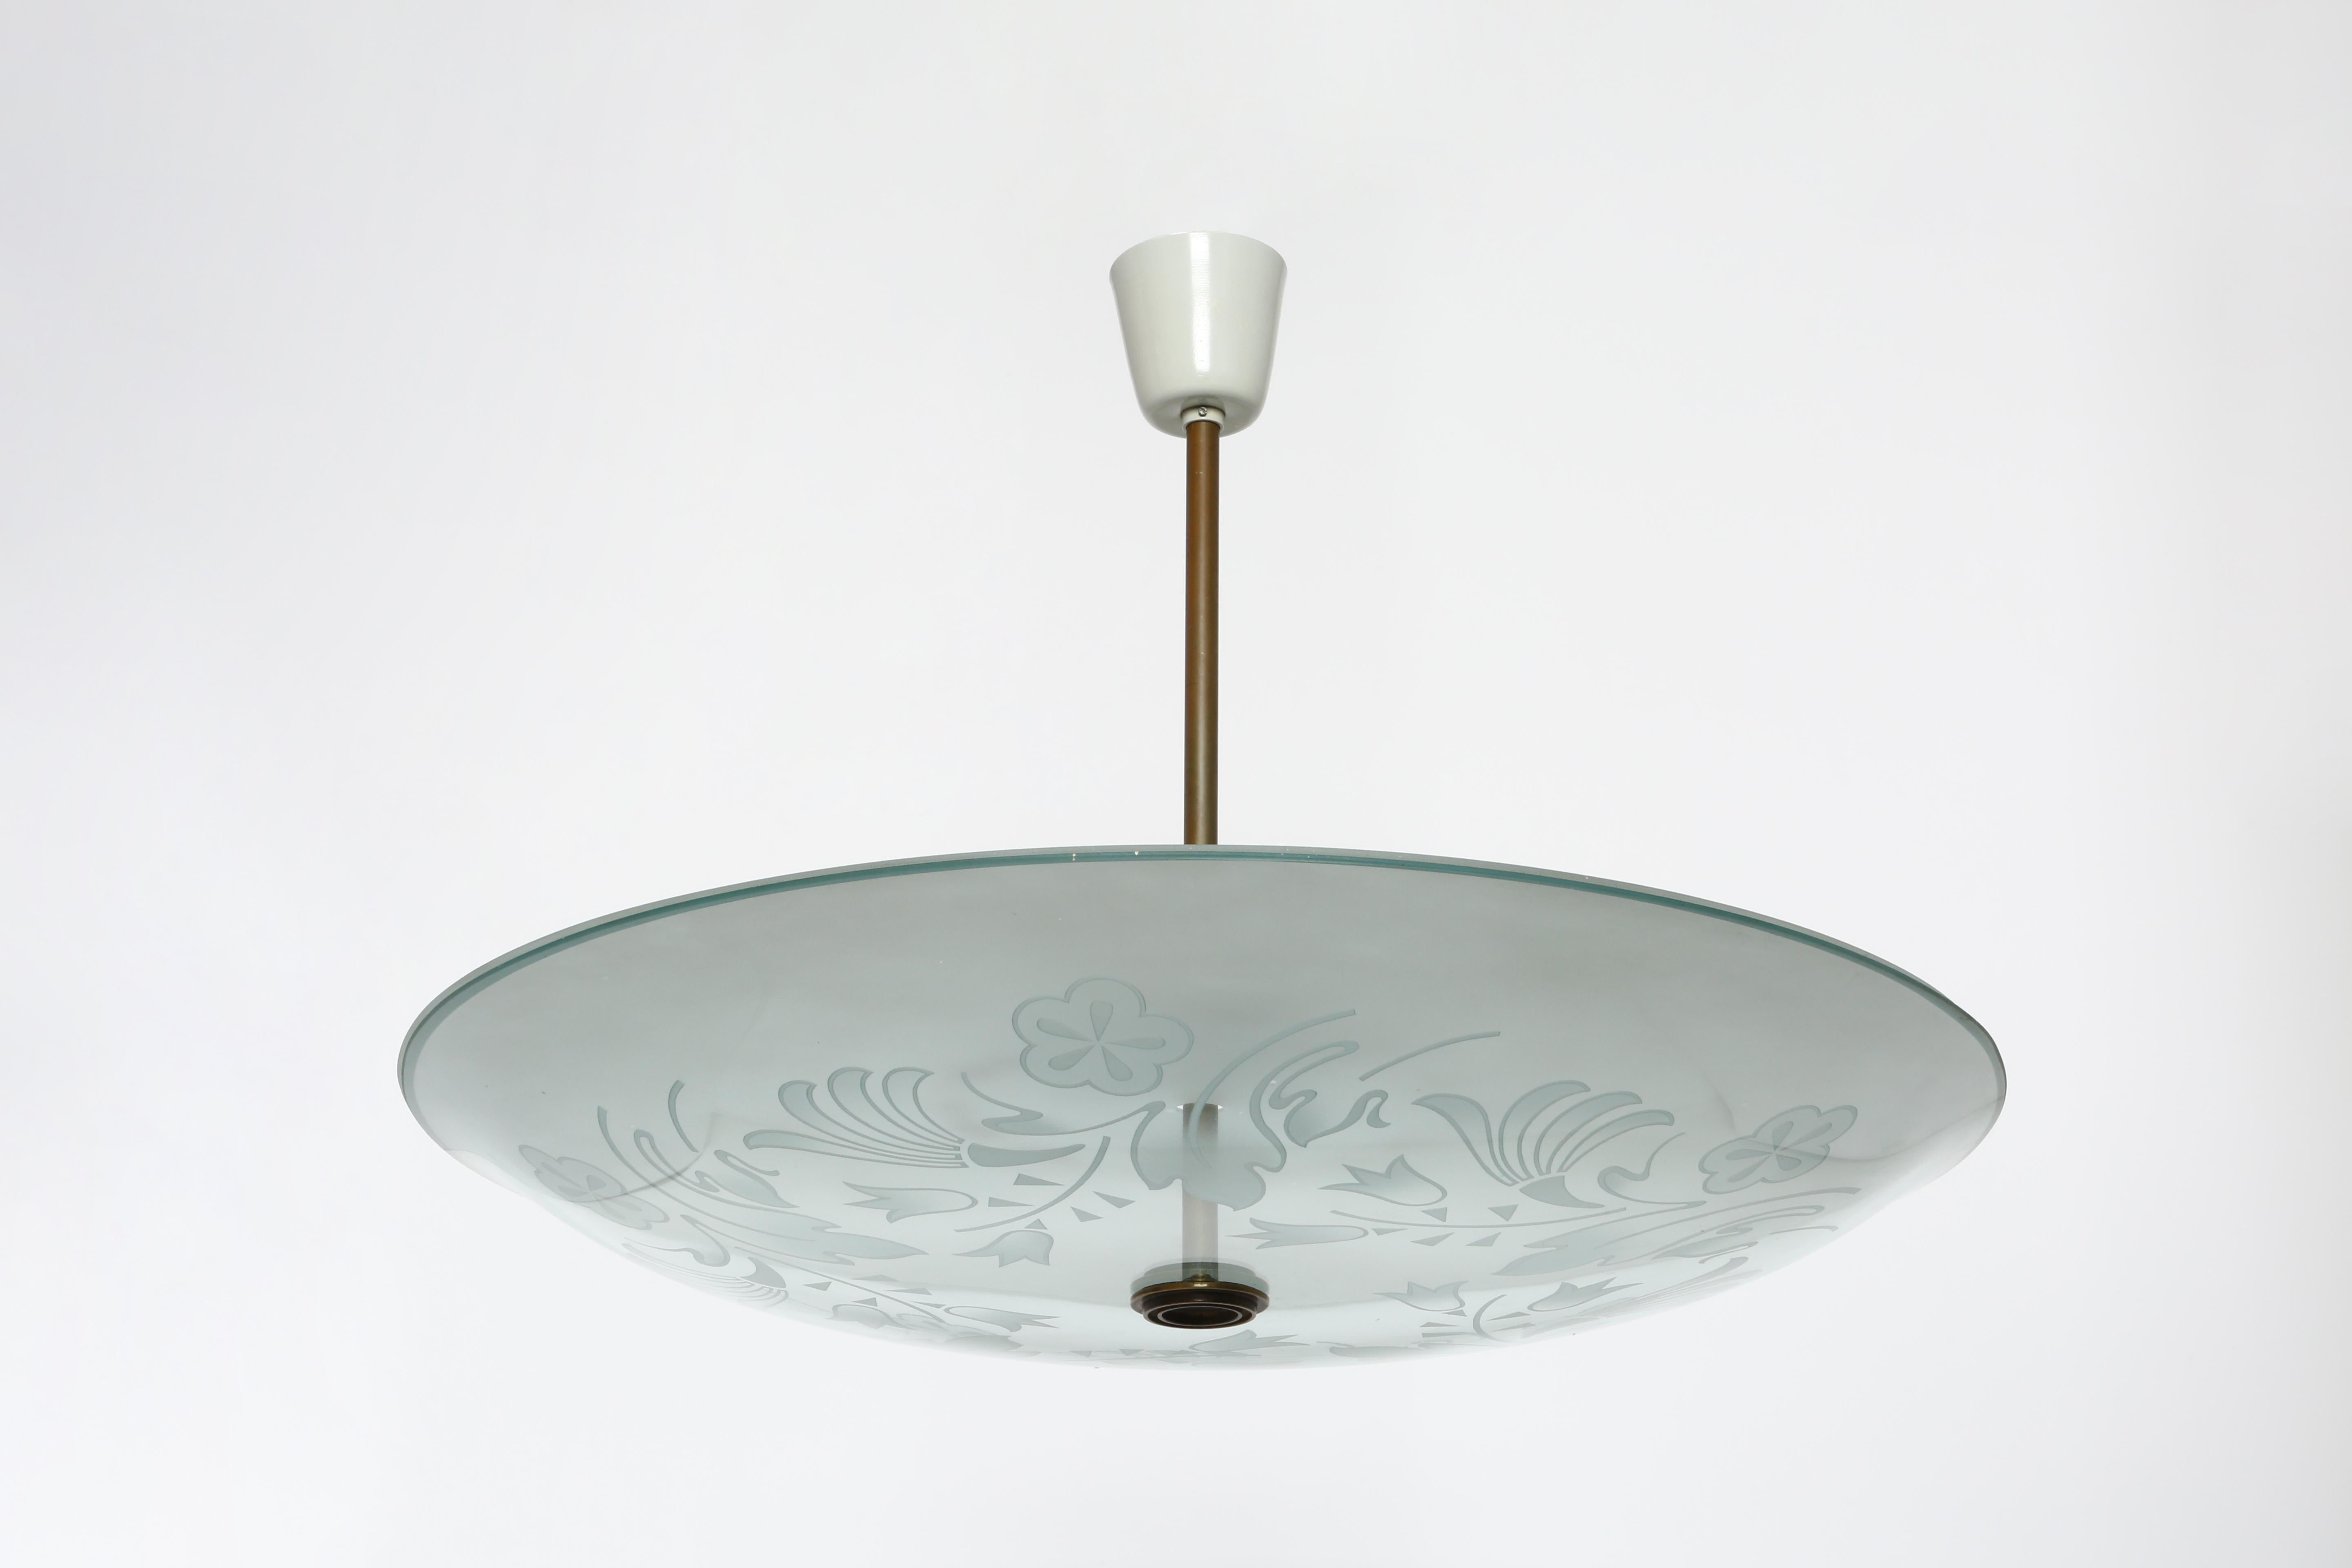 Pietro Chiesa for Fontana Arte suspension ceiling light.
Designed and made in Italy in 1940s.
Etched glass diffuser with a floral motif and a second diffuser in acid etched glass.
Takes 4 medium base sockets.
Complimentary US rewiring upon